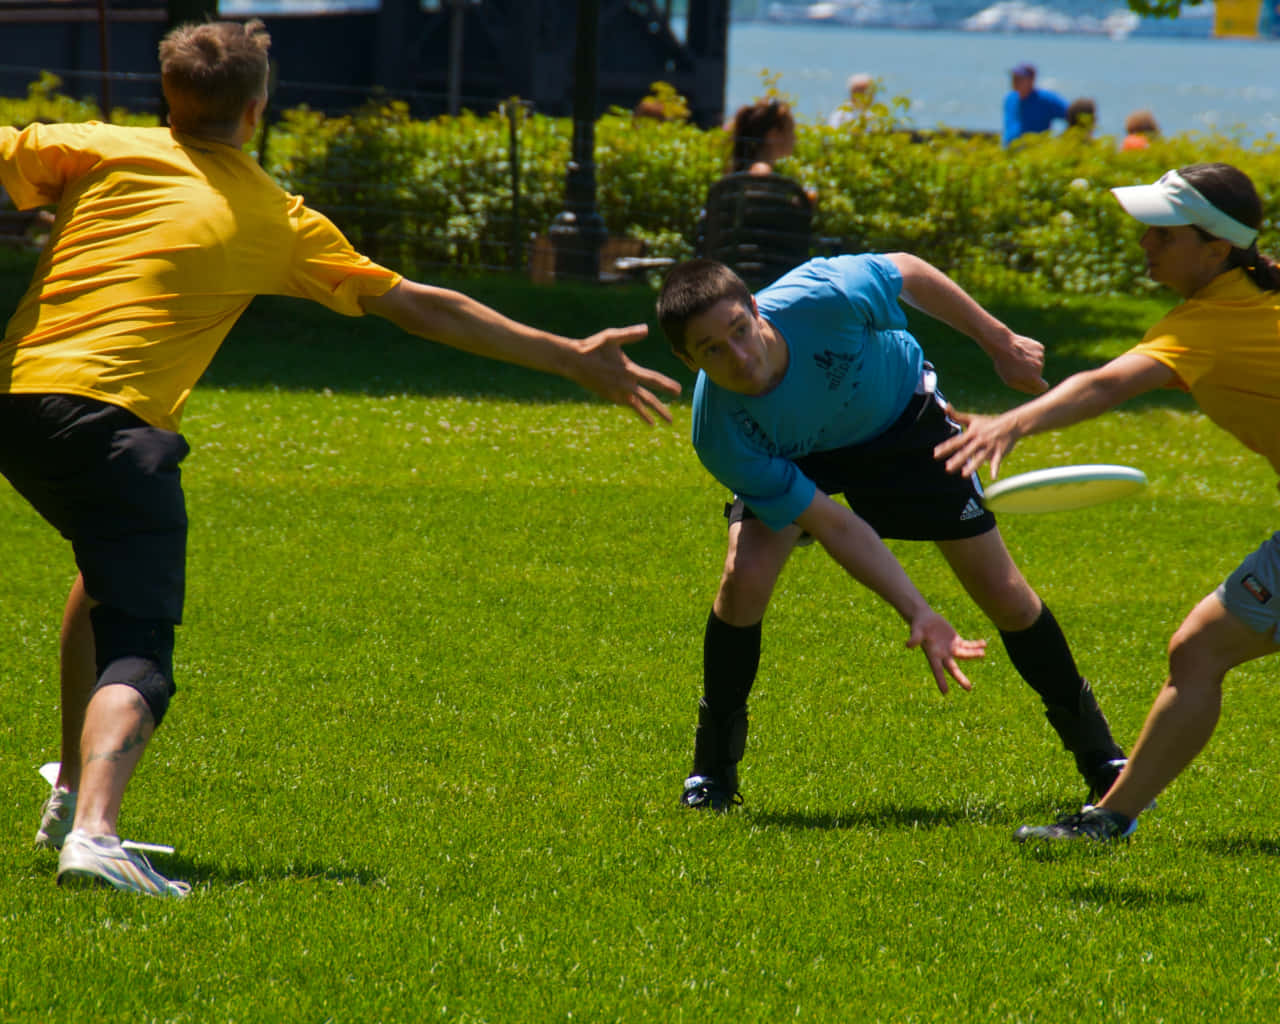 Captivating scenes of Ultimate Frisbee in 1080p resolution.